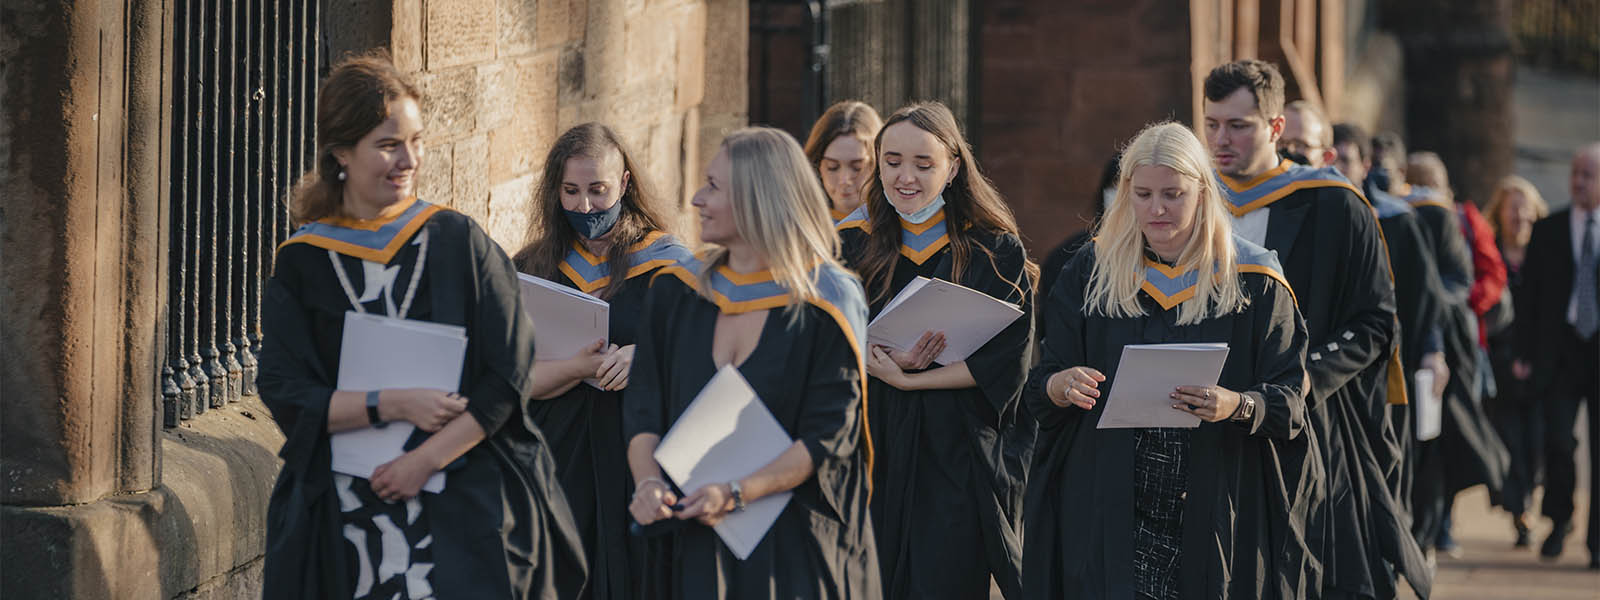 Graduates walking outside the Barony Hall wearing their graduation gowns.